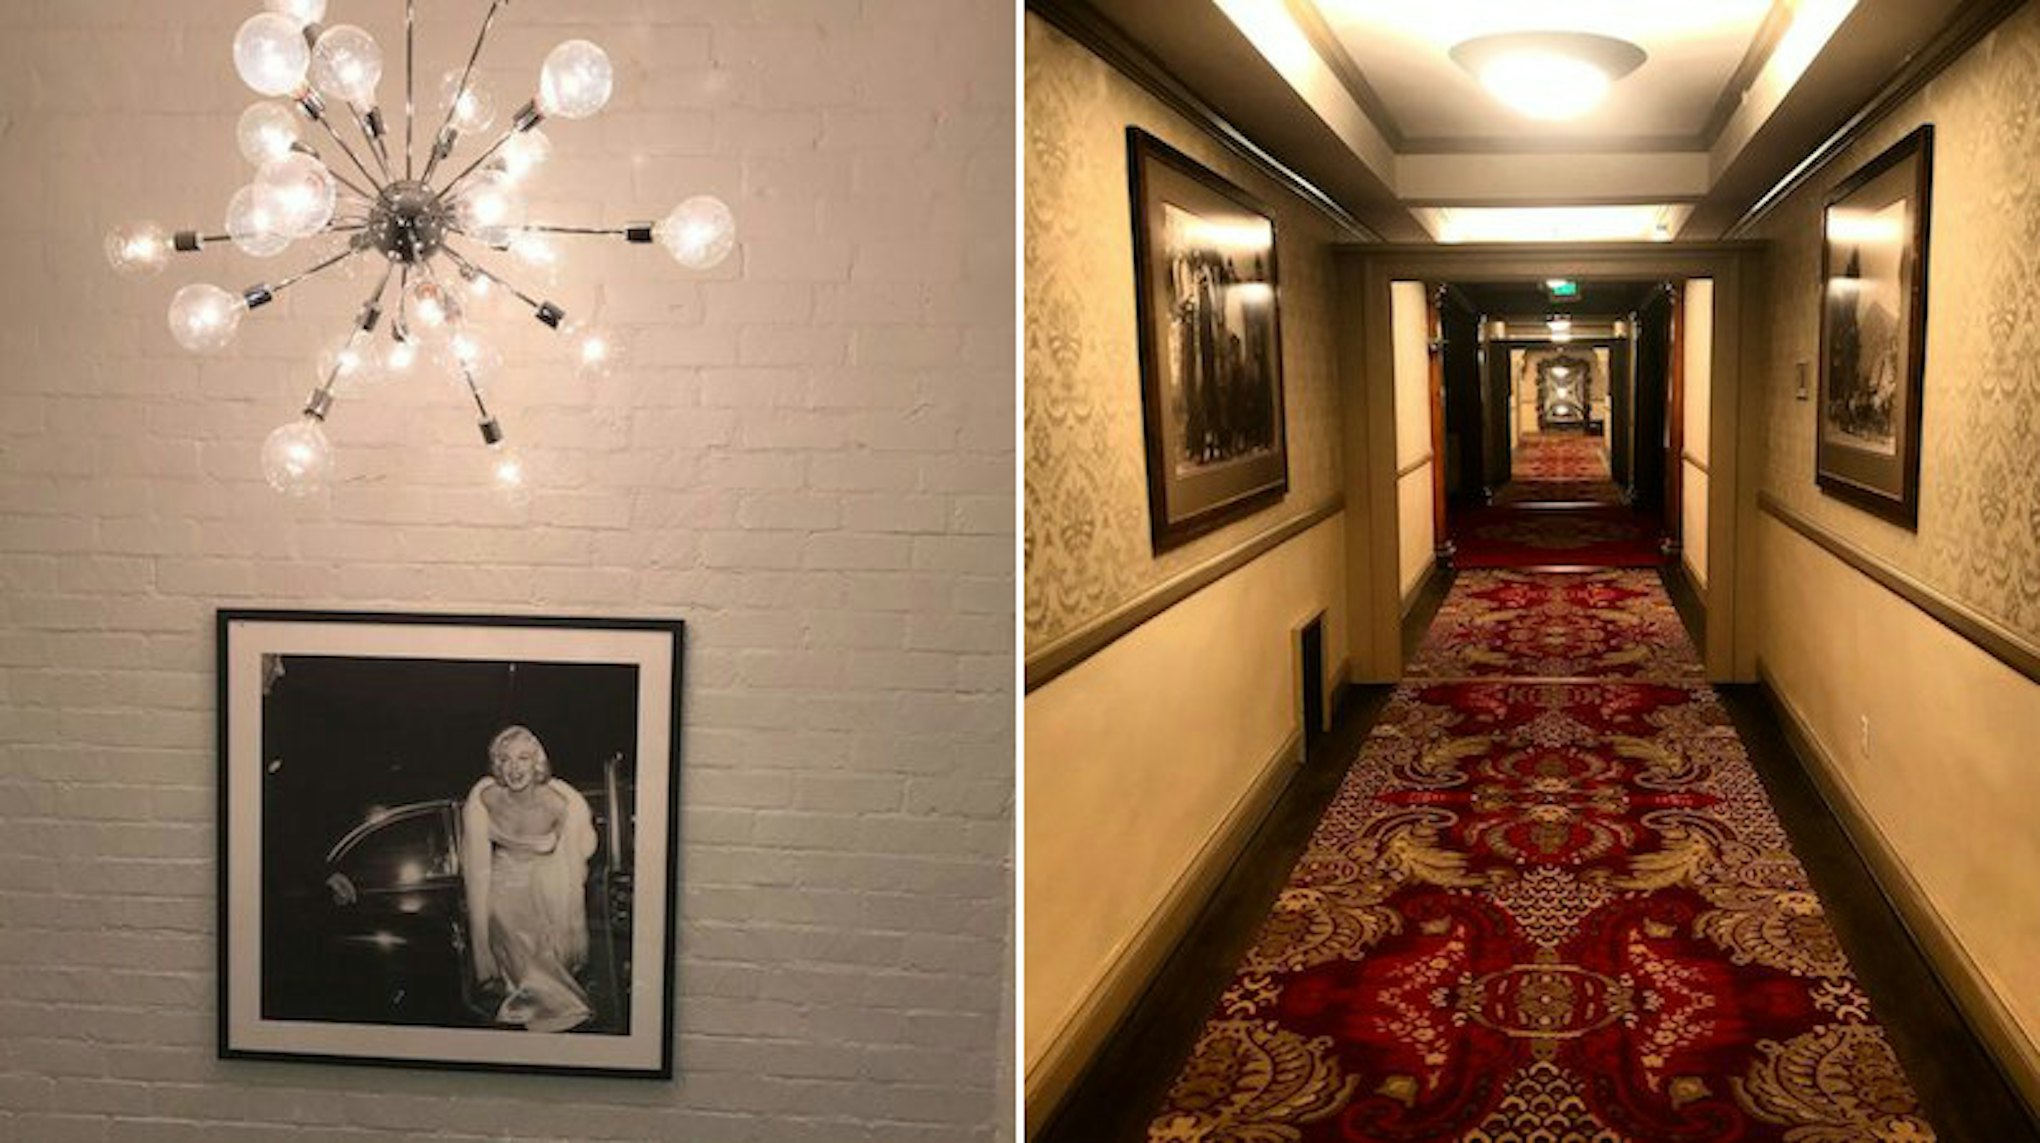 6 Haunted Hotels To Stay In On Halloween For A Seriously Spooky Experience